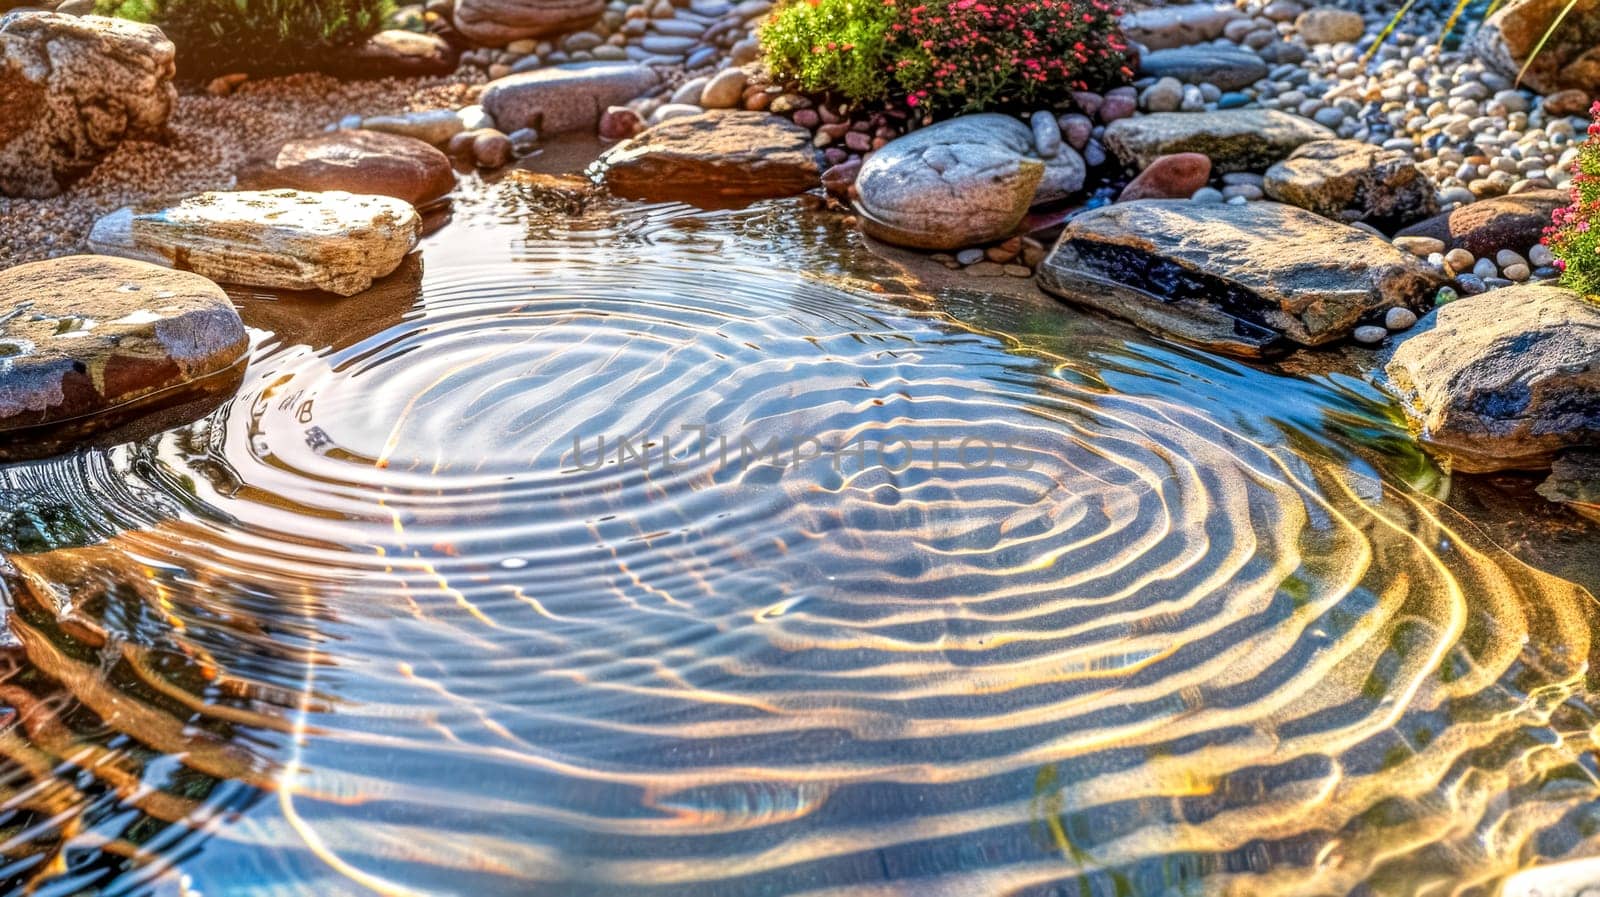 Circular ripples on a serene pond in a rock garden with warm sunset light reflecting